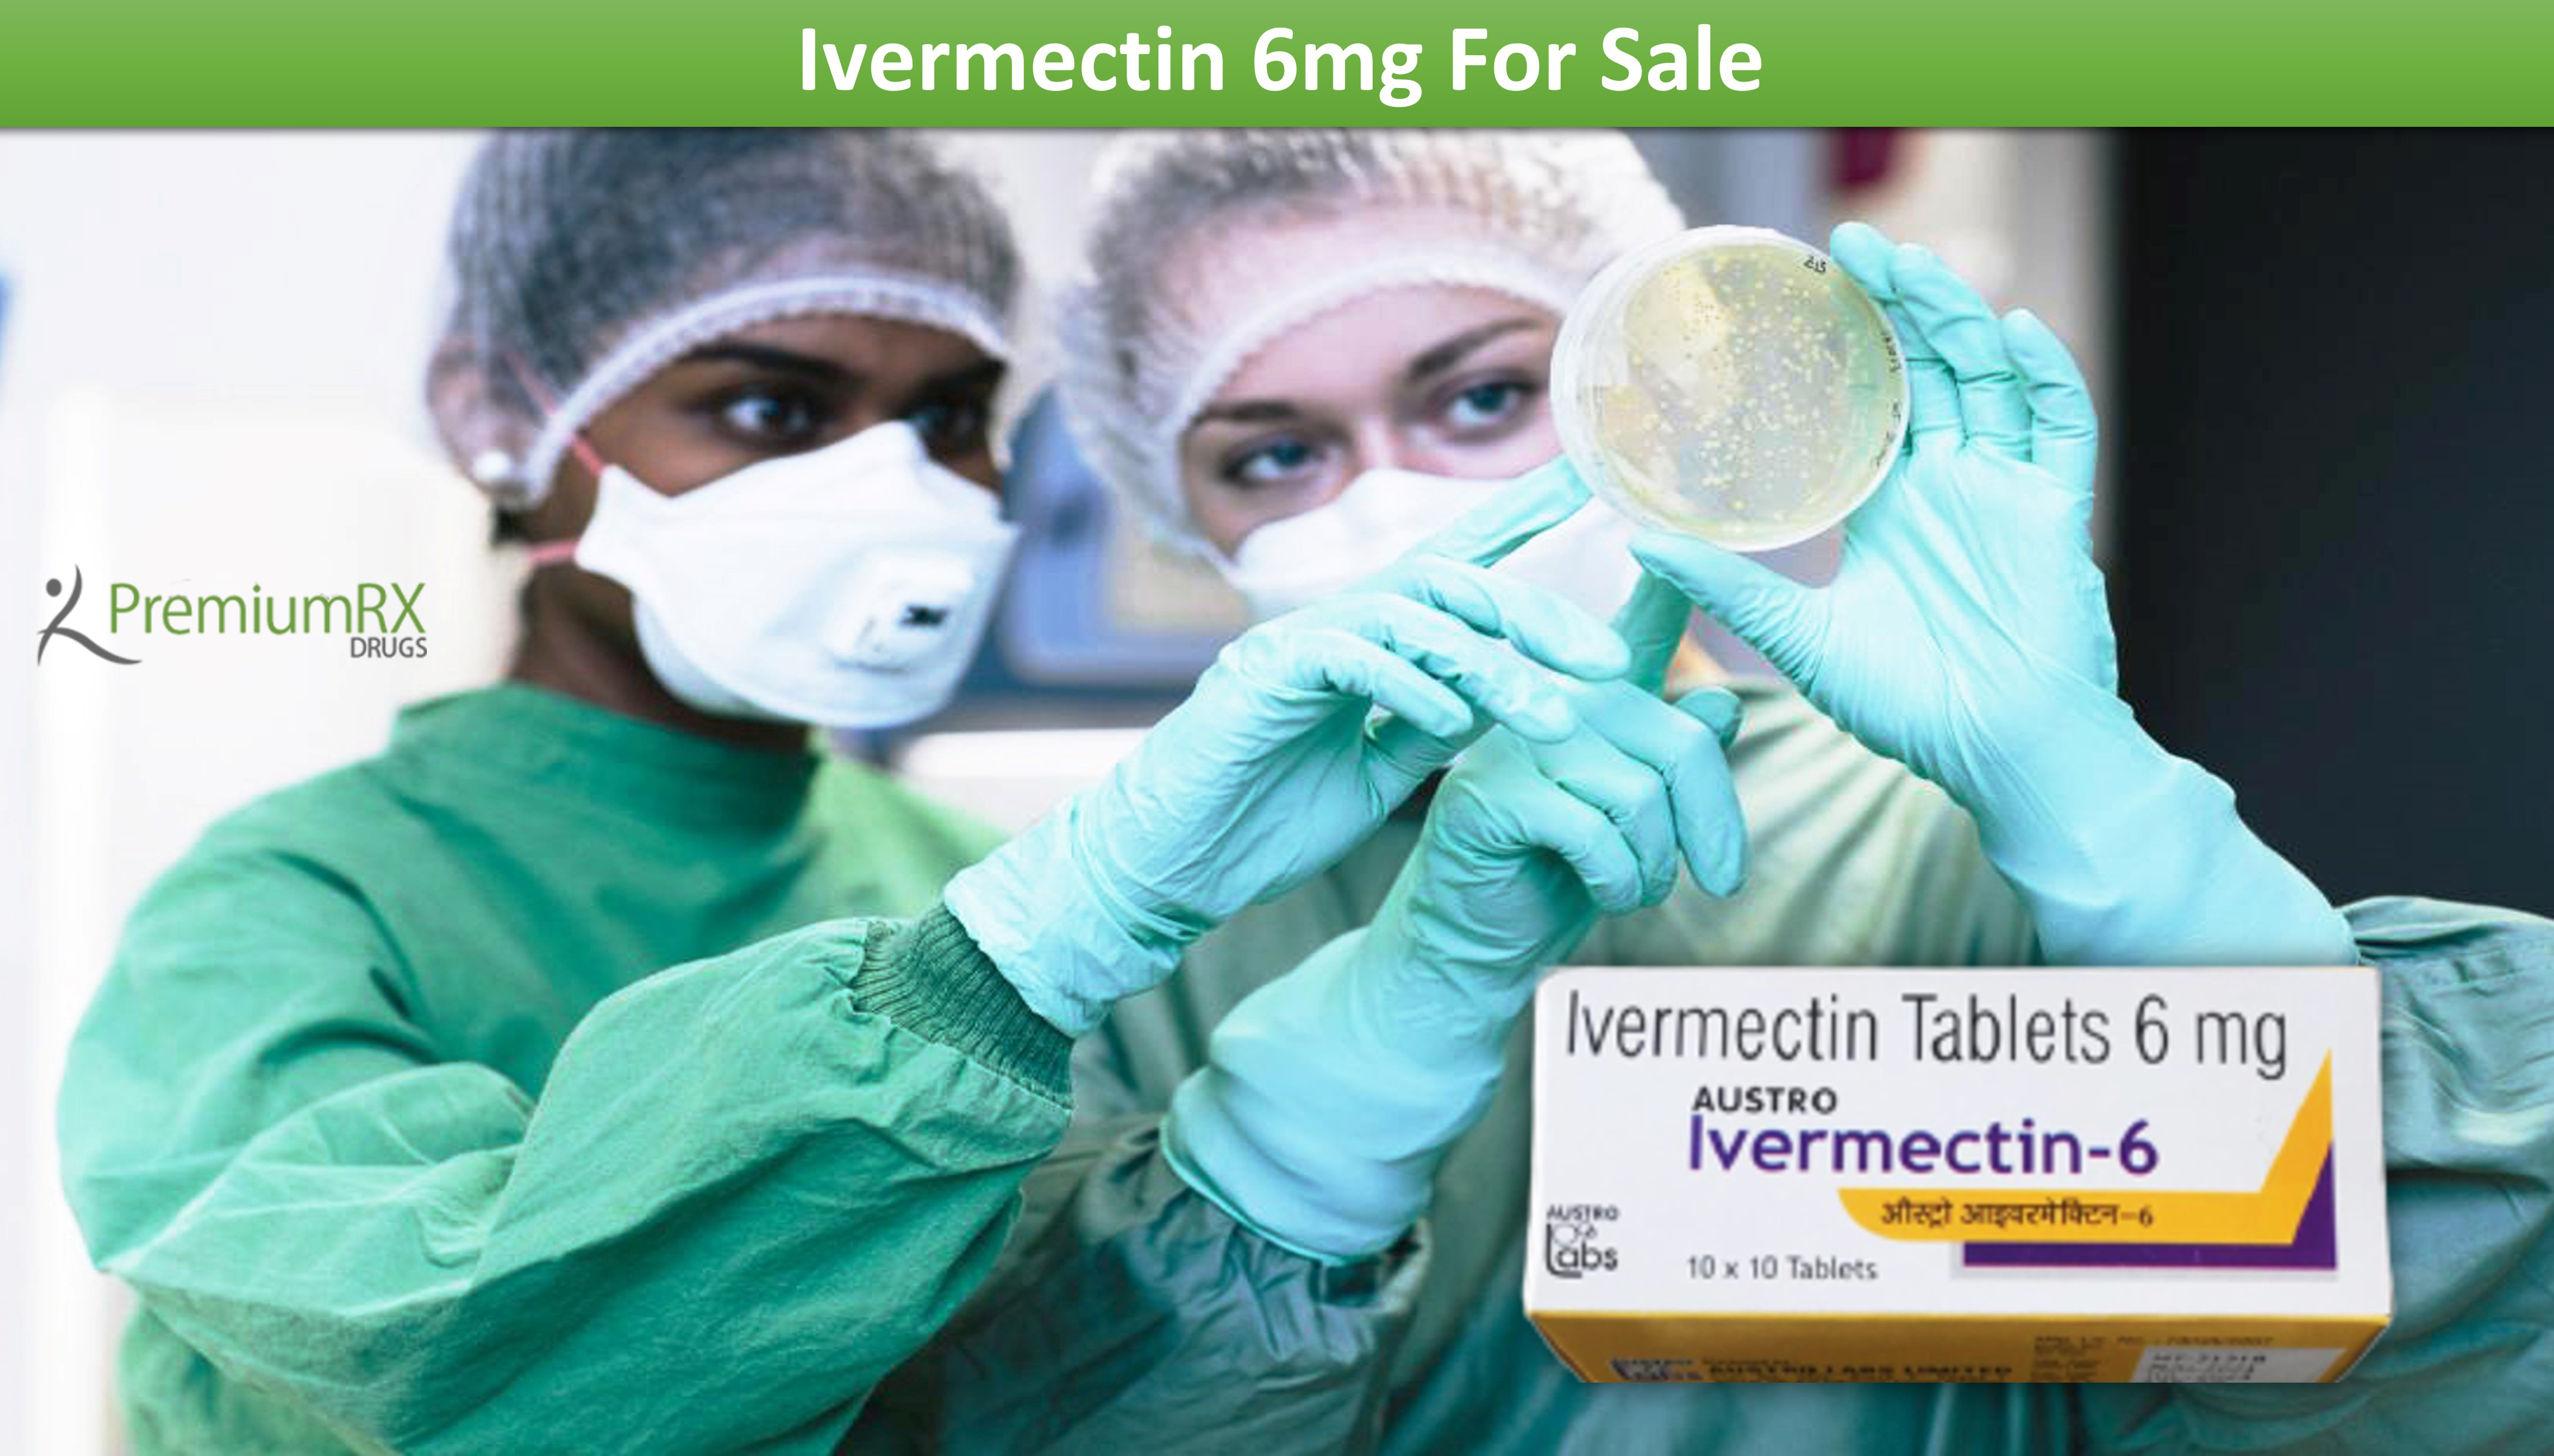 Ivermectin 6mg For Sale